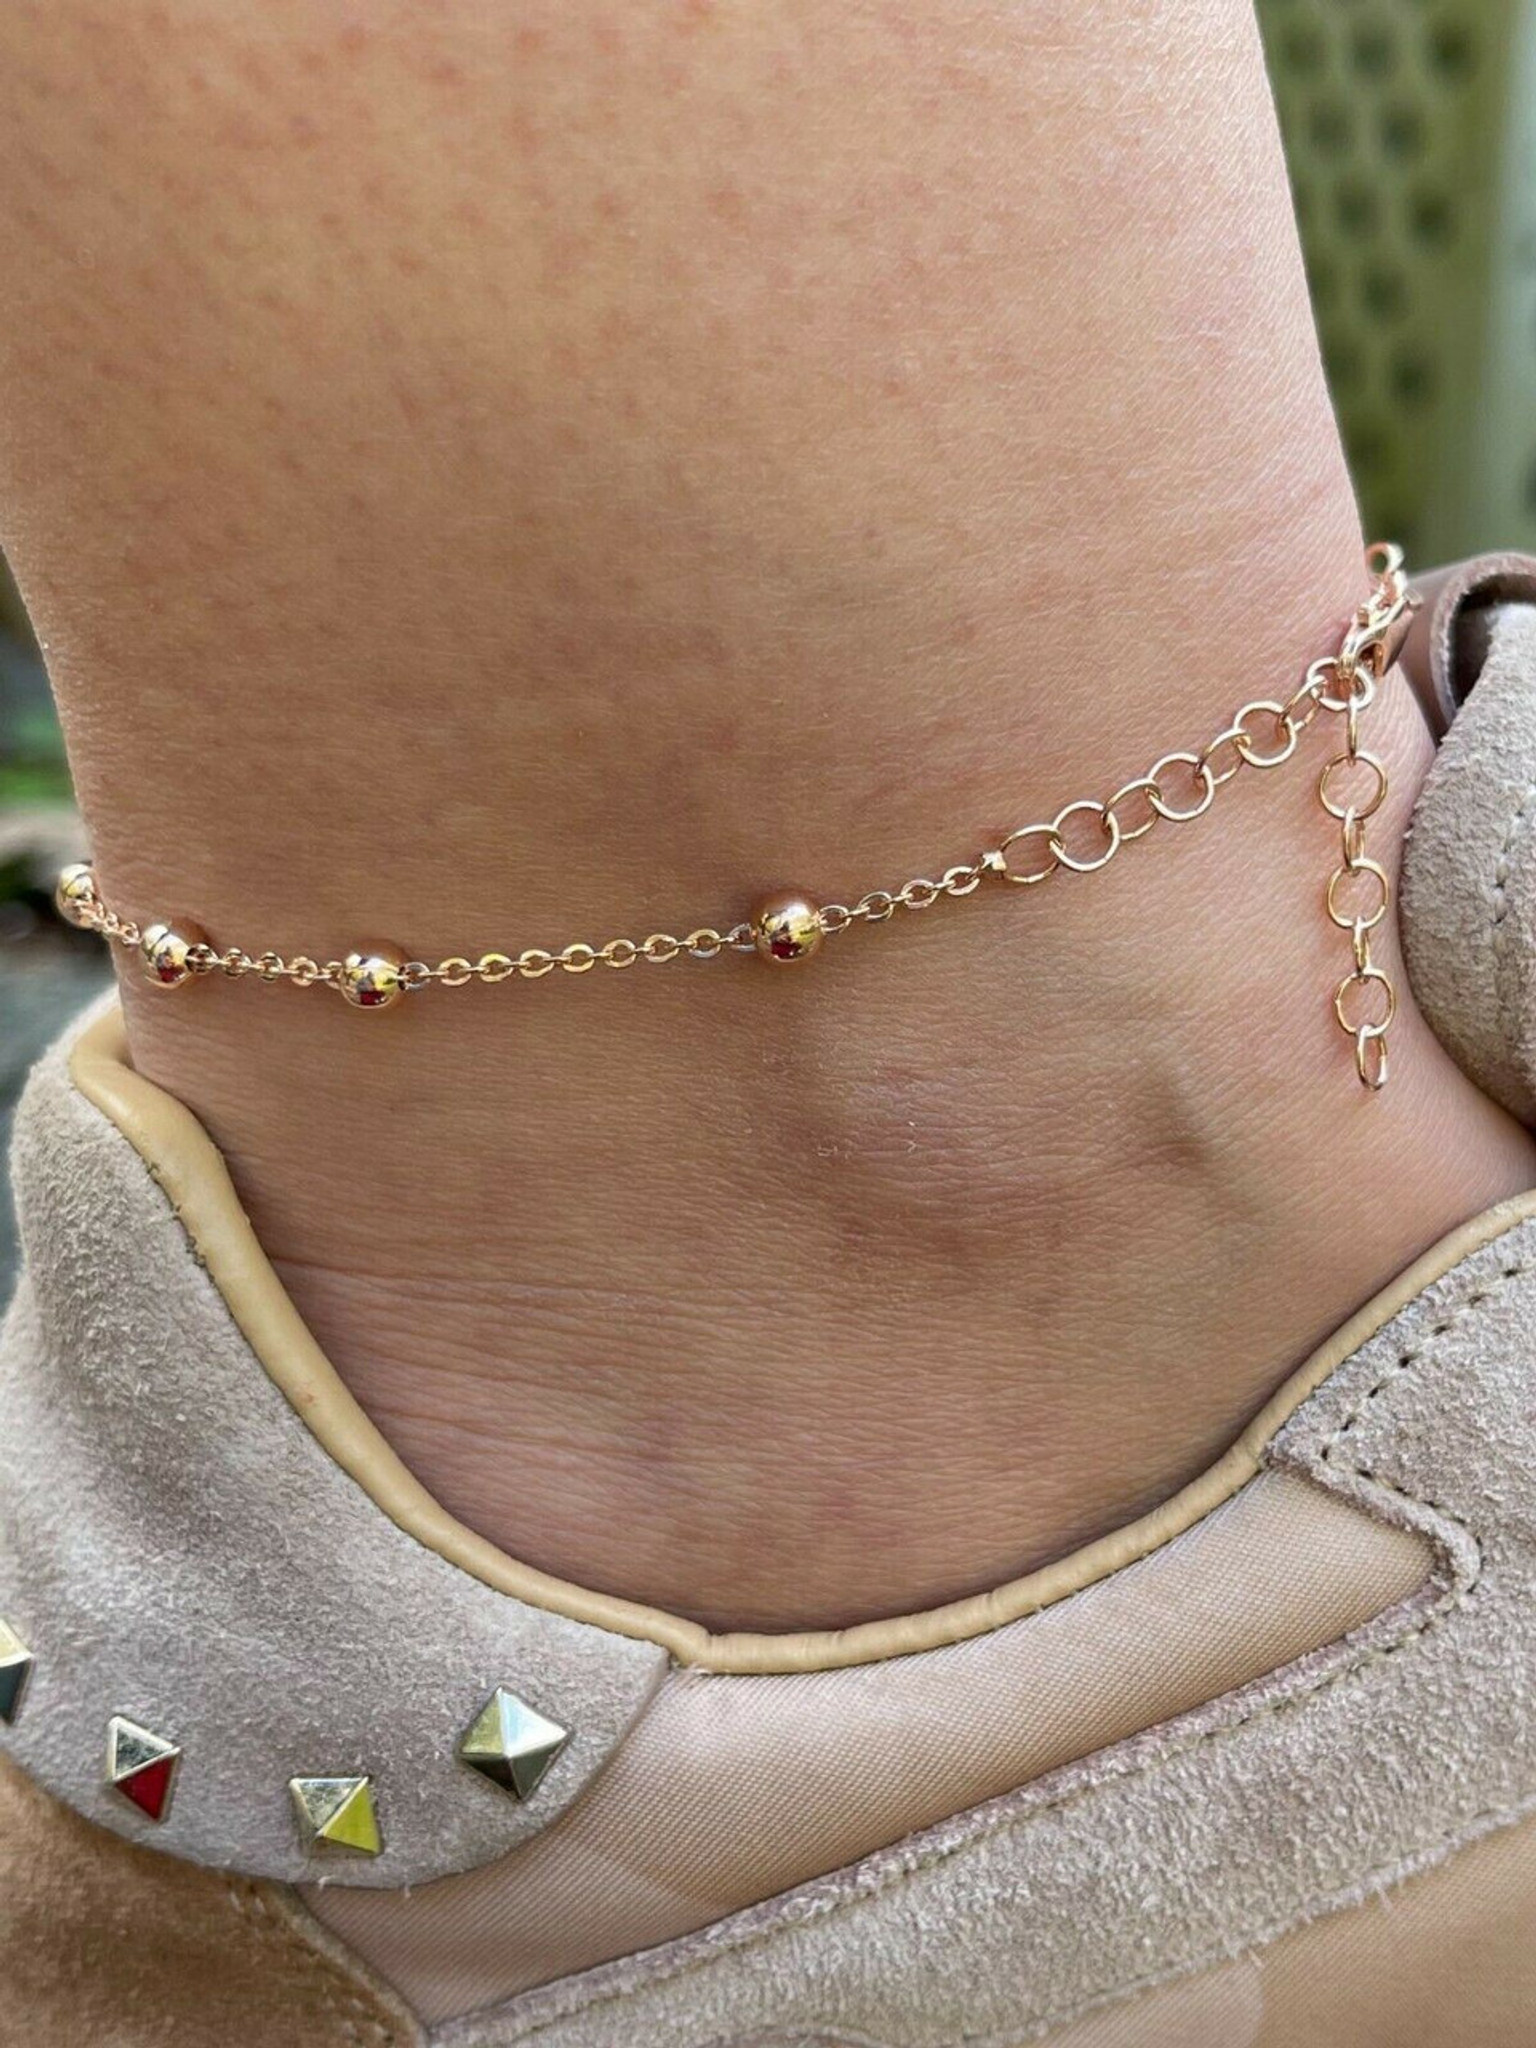 Amberta 925 Sterling Silver Adjustable Ankle Bracelet - 2.4 mm Rolo Chain  Anklet with Stars and Moons - 9